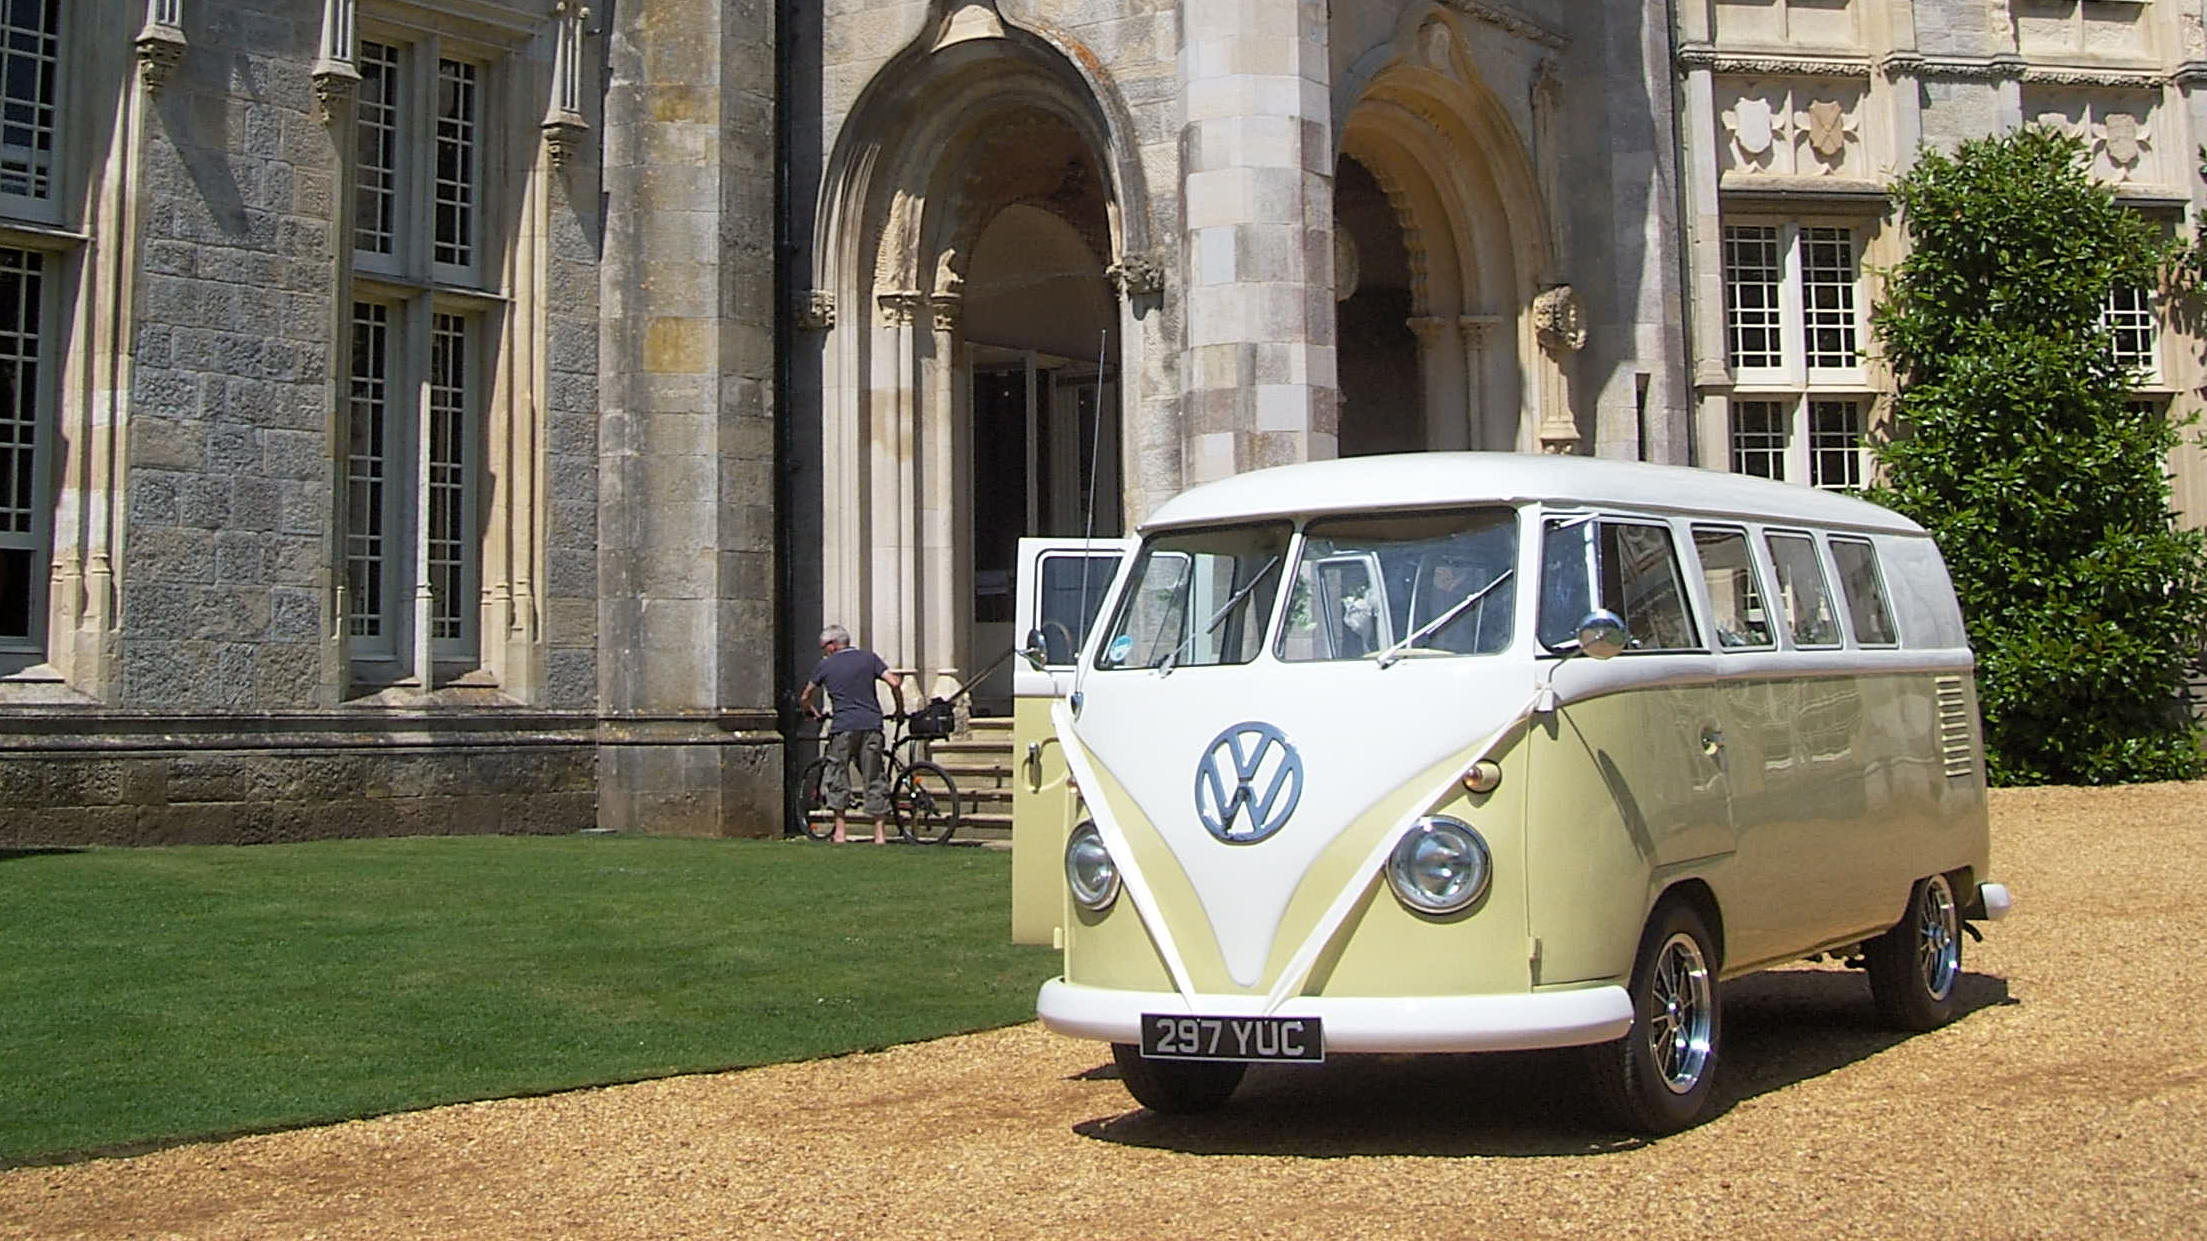 Retro Classic Volkswagen Campervan decorated with white ribbons at a local Evershot wedding venue.